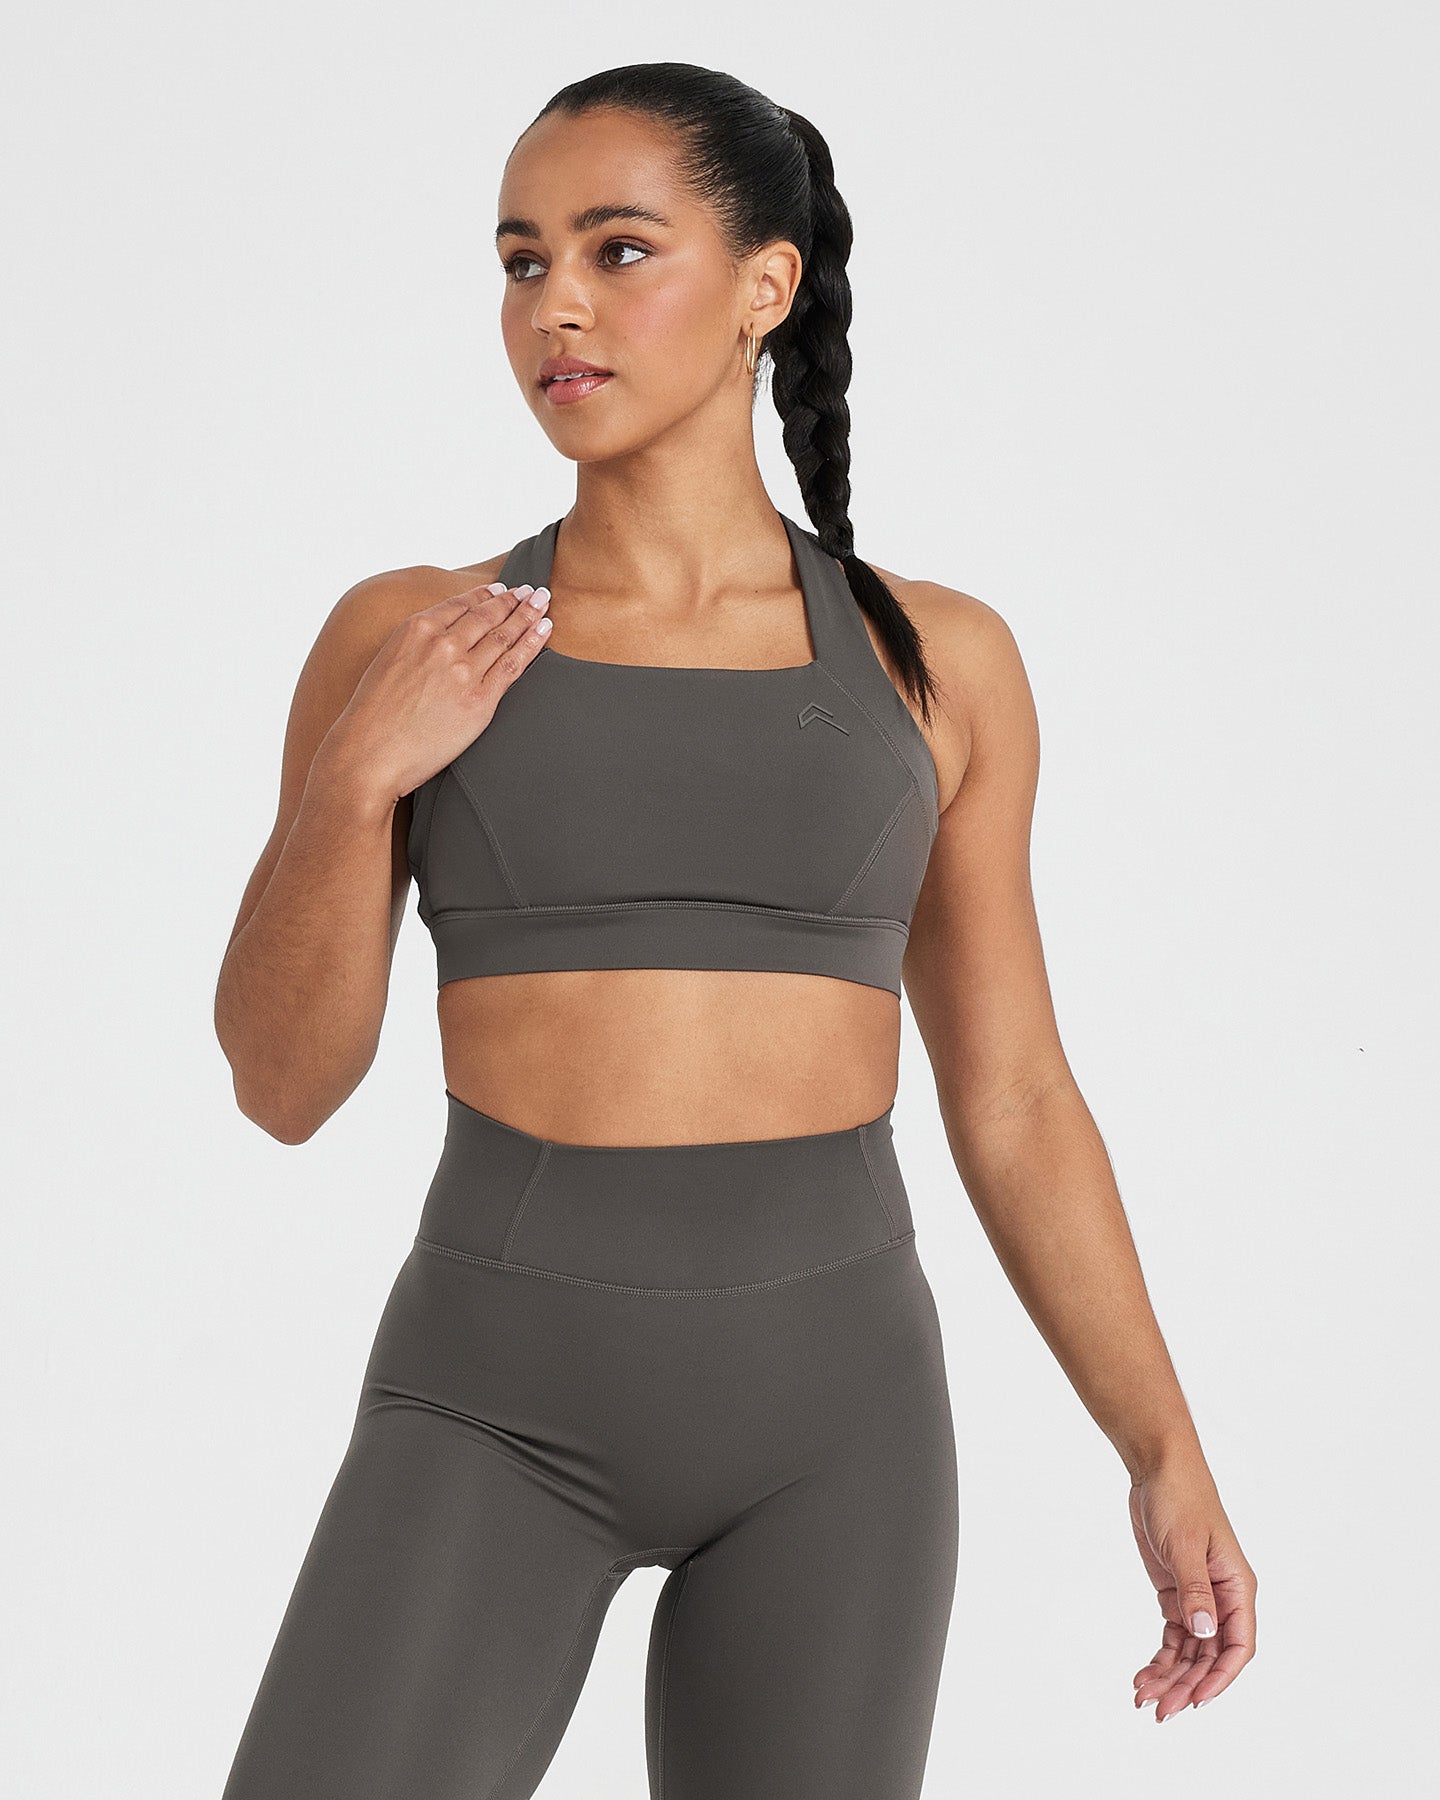 Wide Strap Sports Bra - Deep Taupe - Women's | Oner Active US